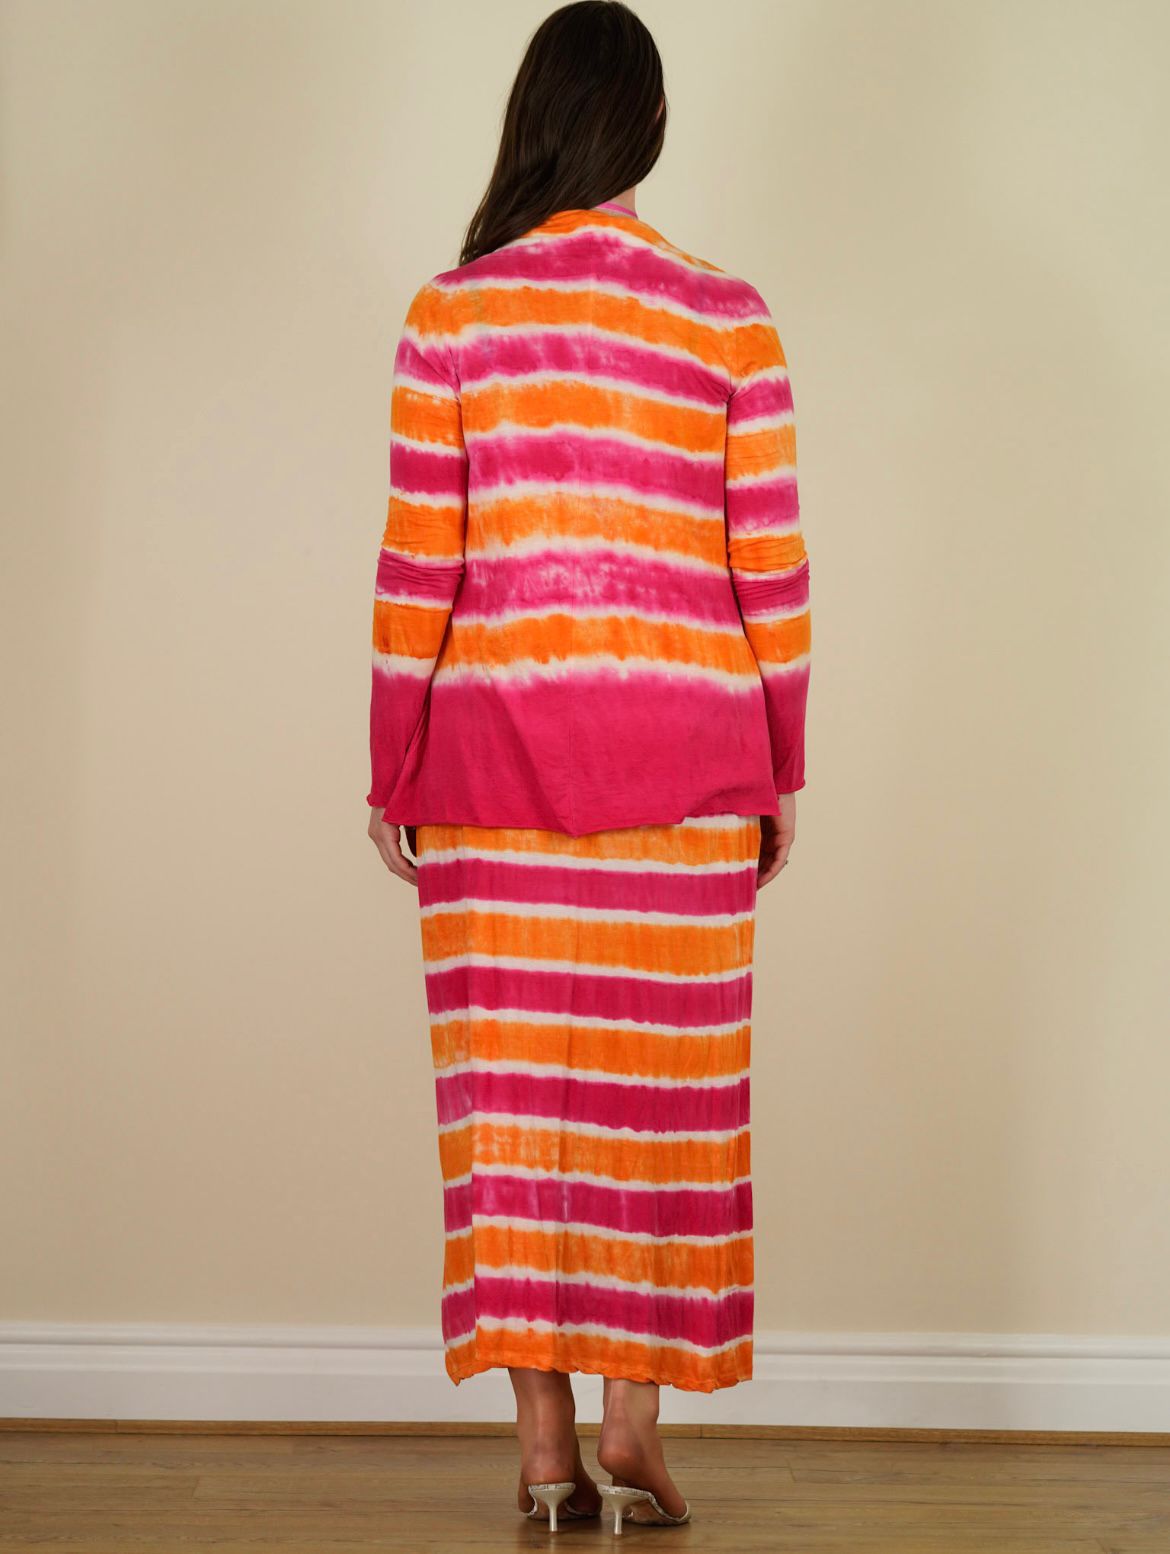 Velvet orange and pink tie dye dress with cardigan and necklace size GB 12